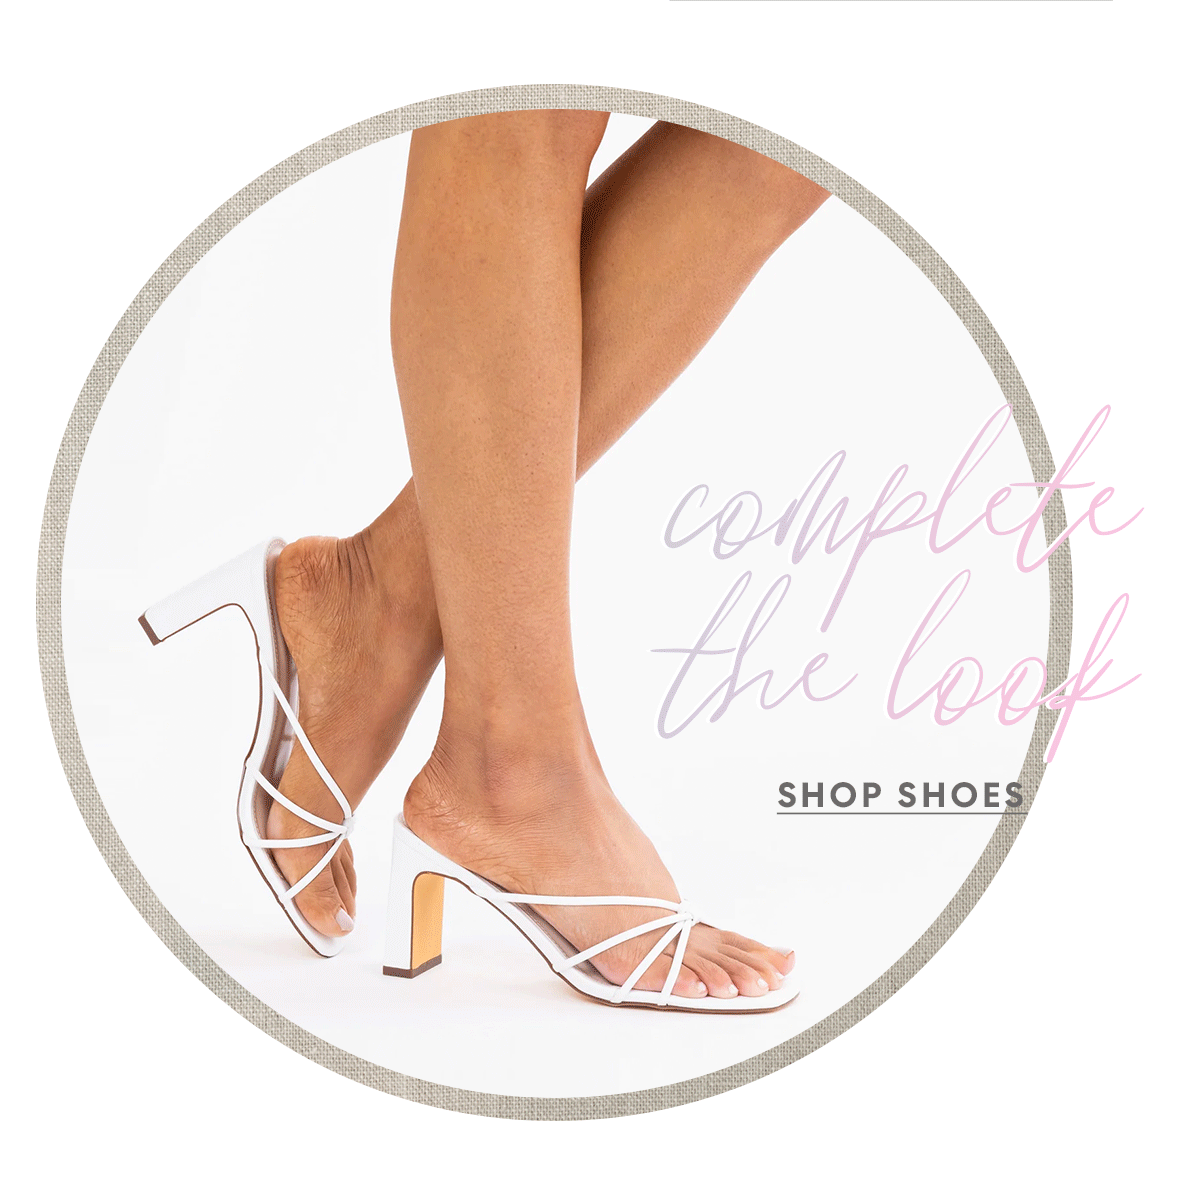 COMPLETE THE LOOK | SHOP SHOES